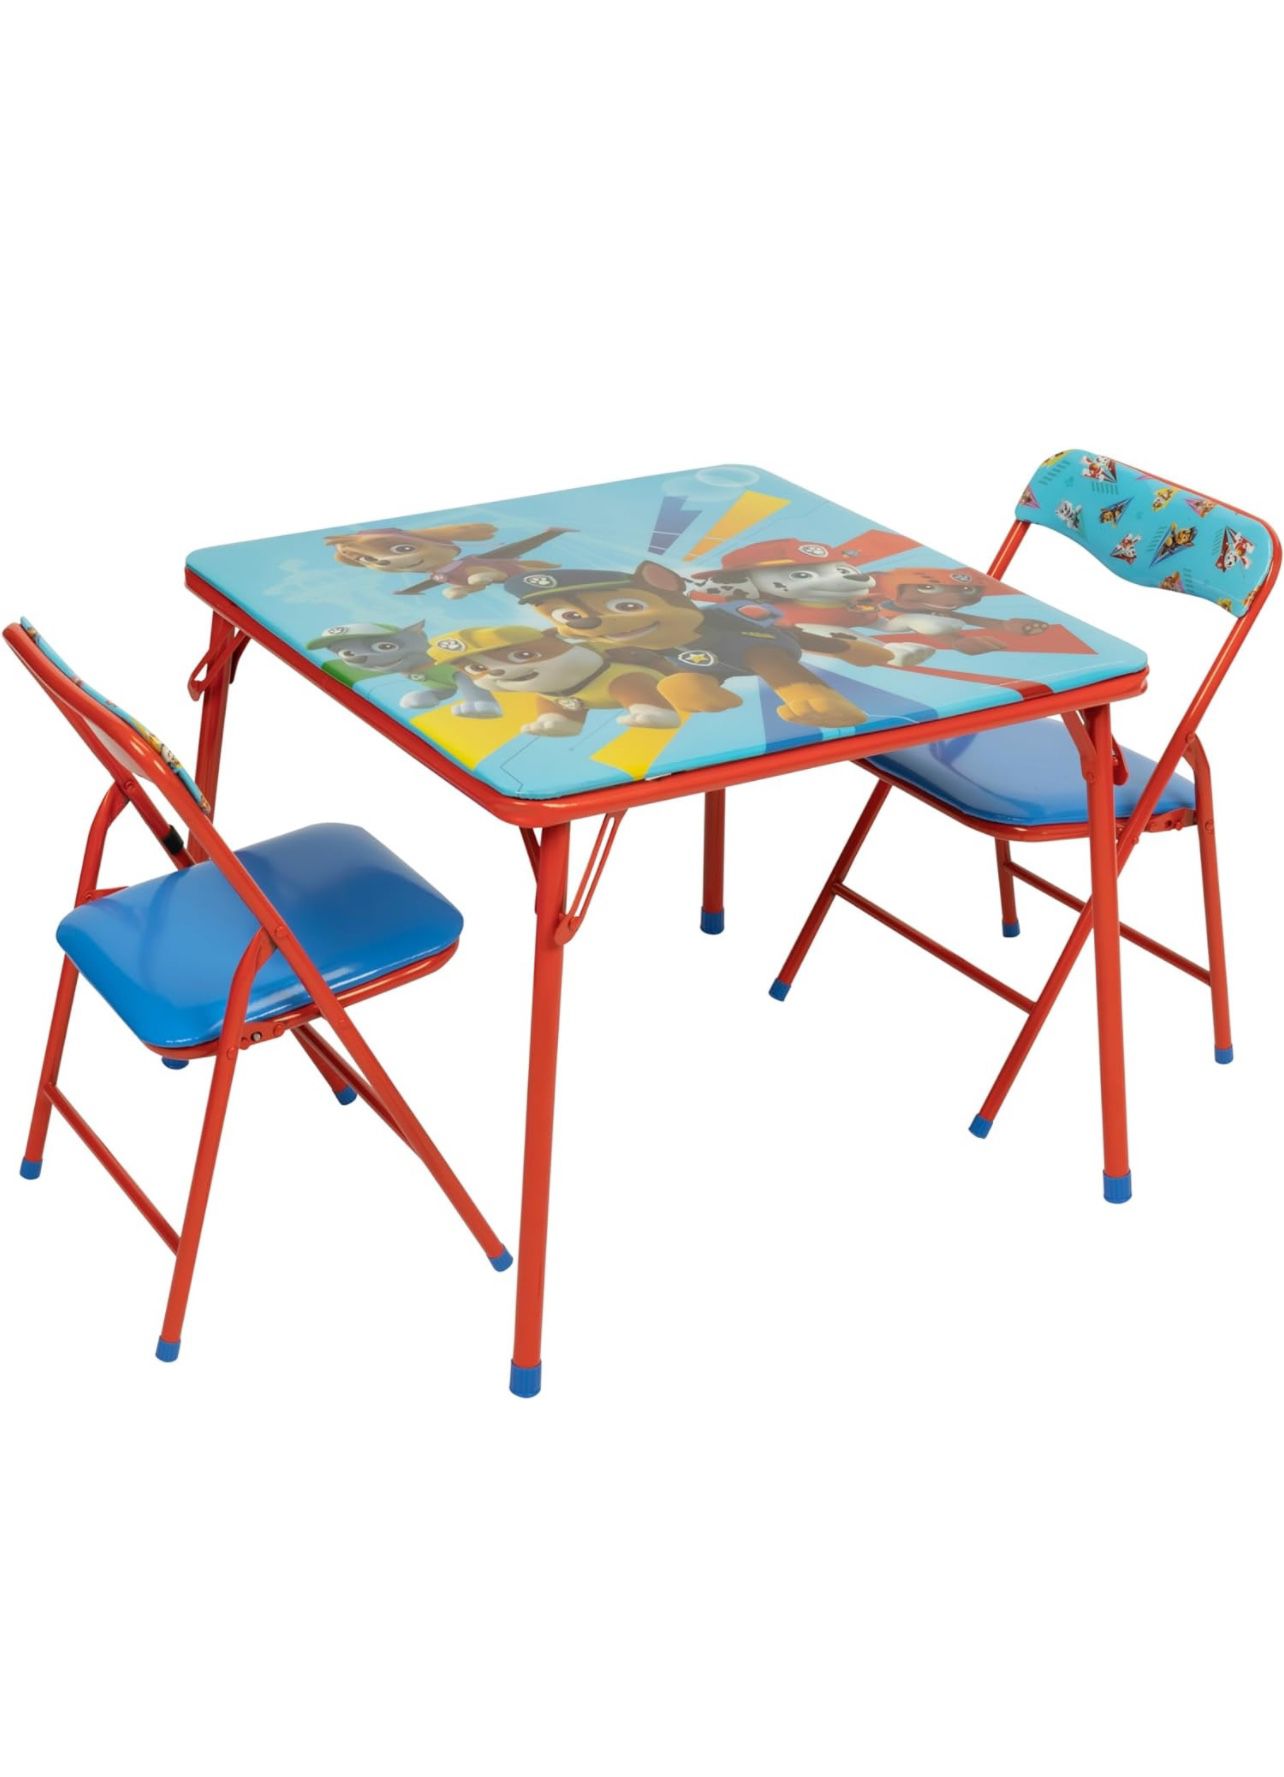 Paw patrol Activity Table &  2 Chair set